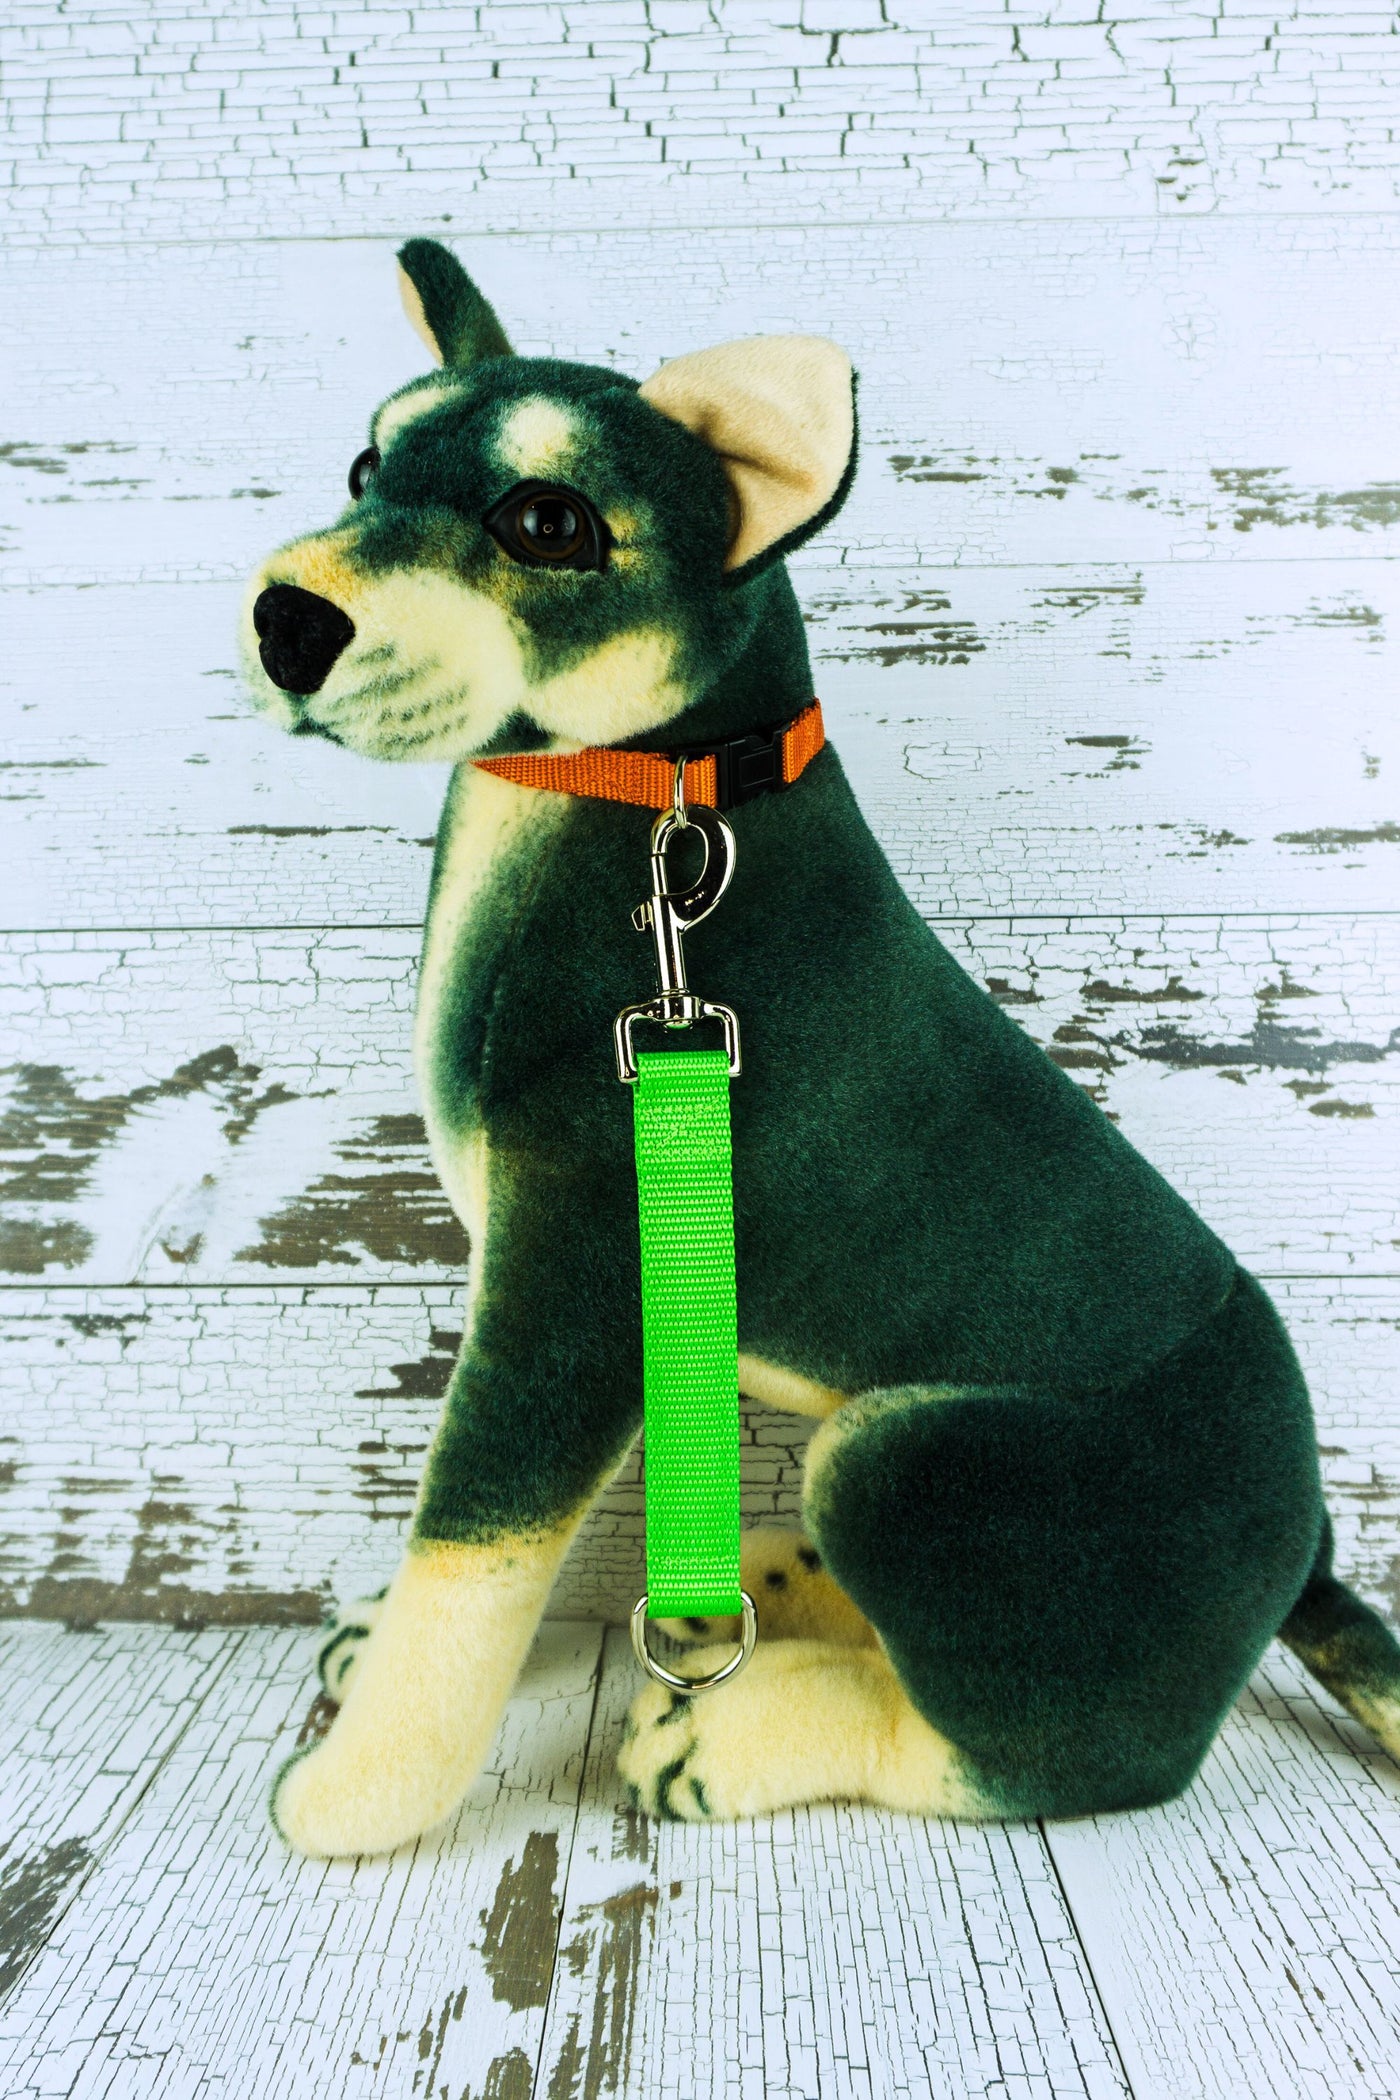 Neon green heavy duty training tab is shown clipped to the end of a dog mannequin's collar.